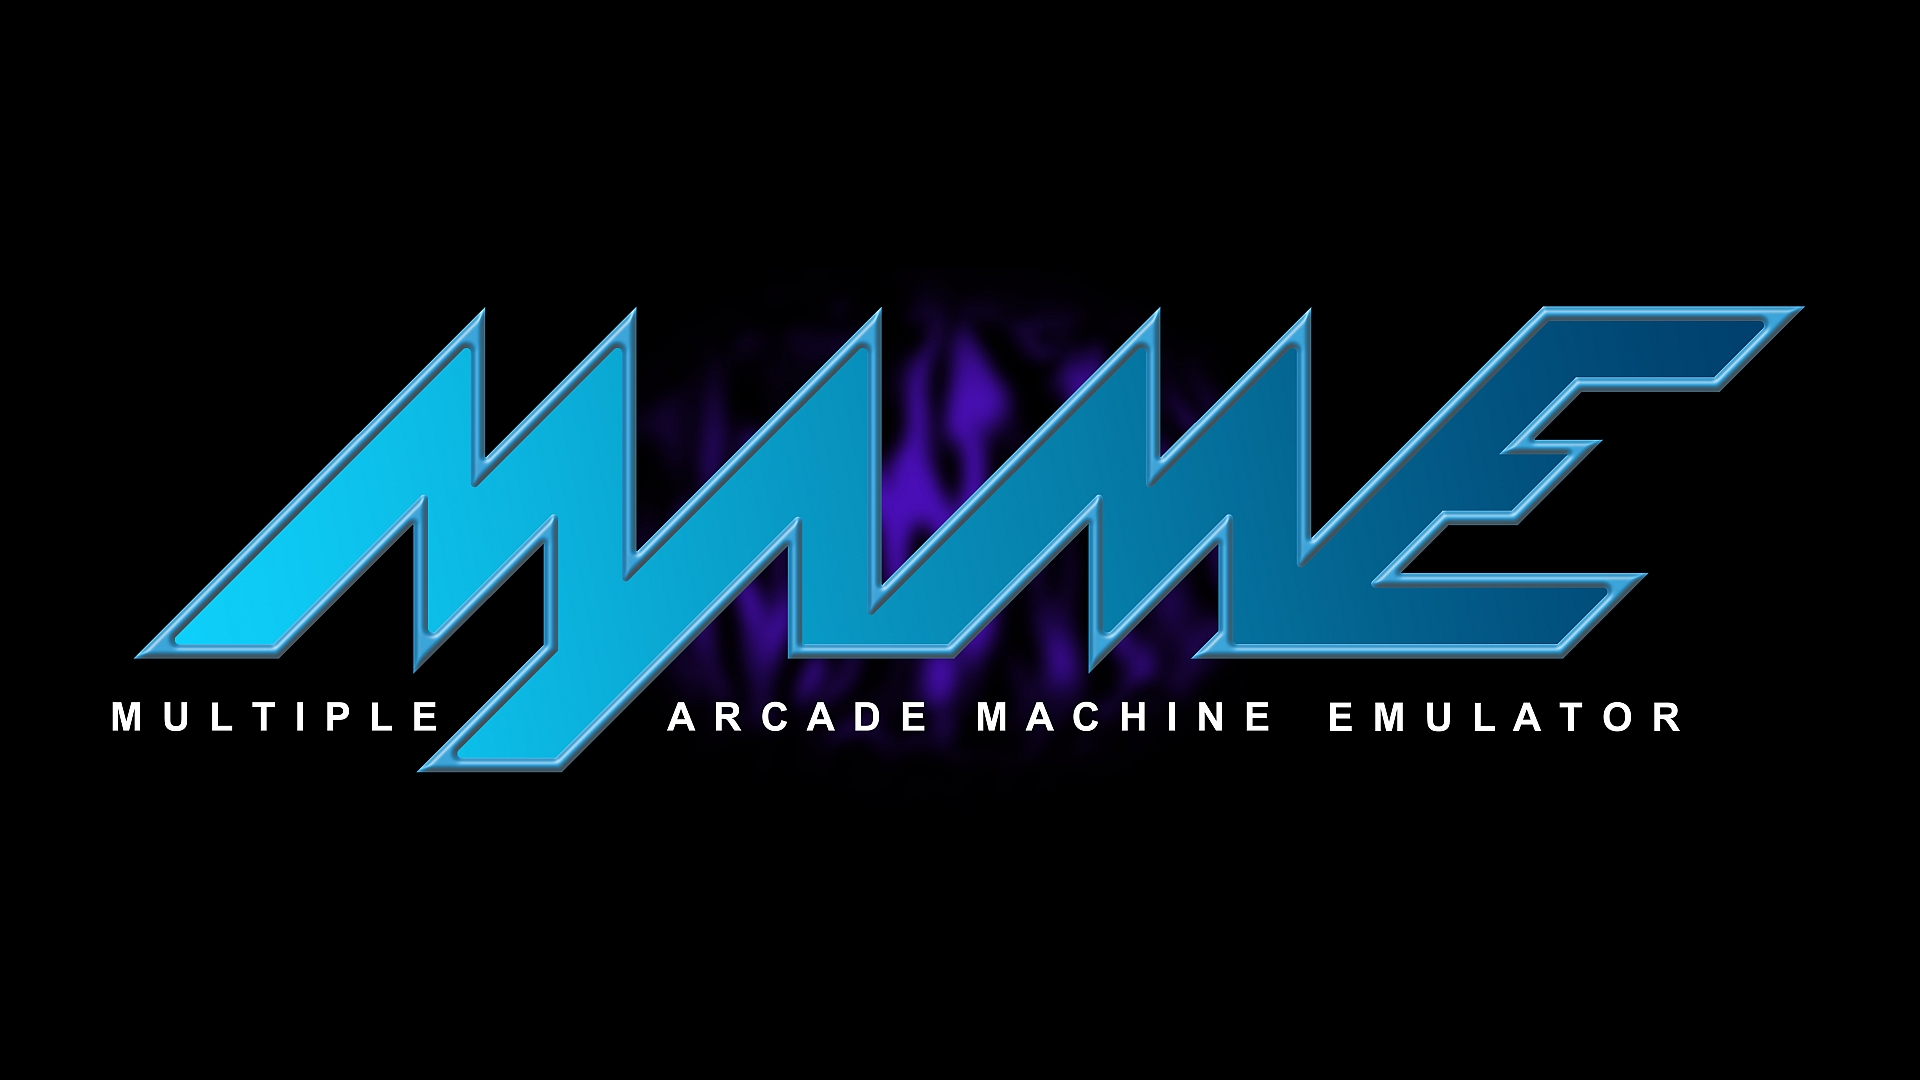 Generic Mame Logo 1080p Home Theater Backdrops Wallpaper